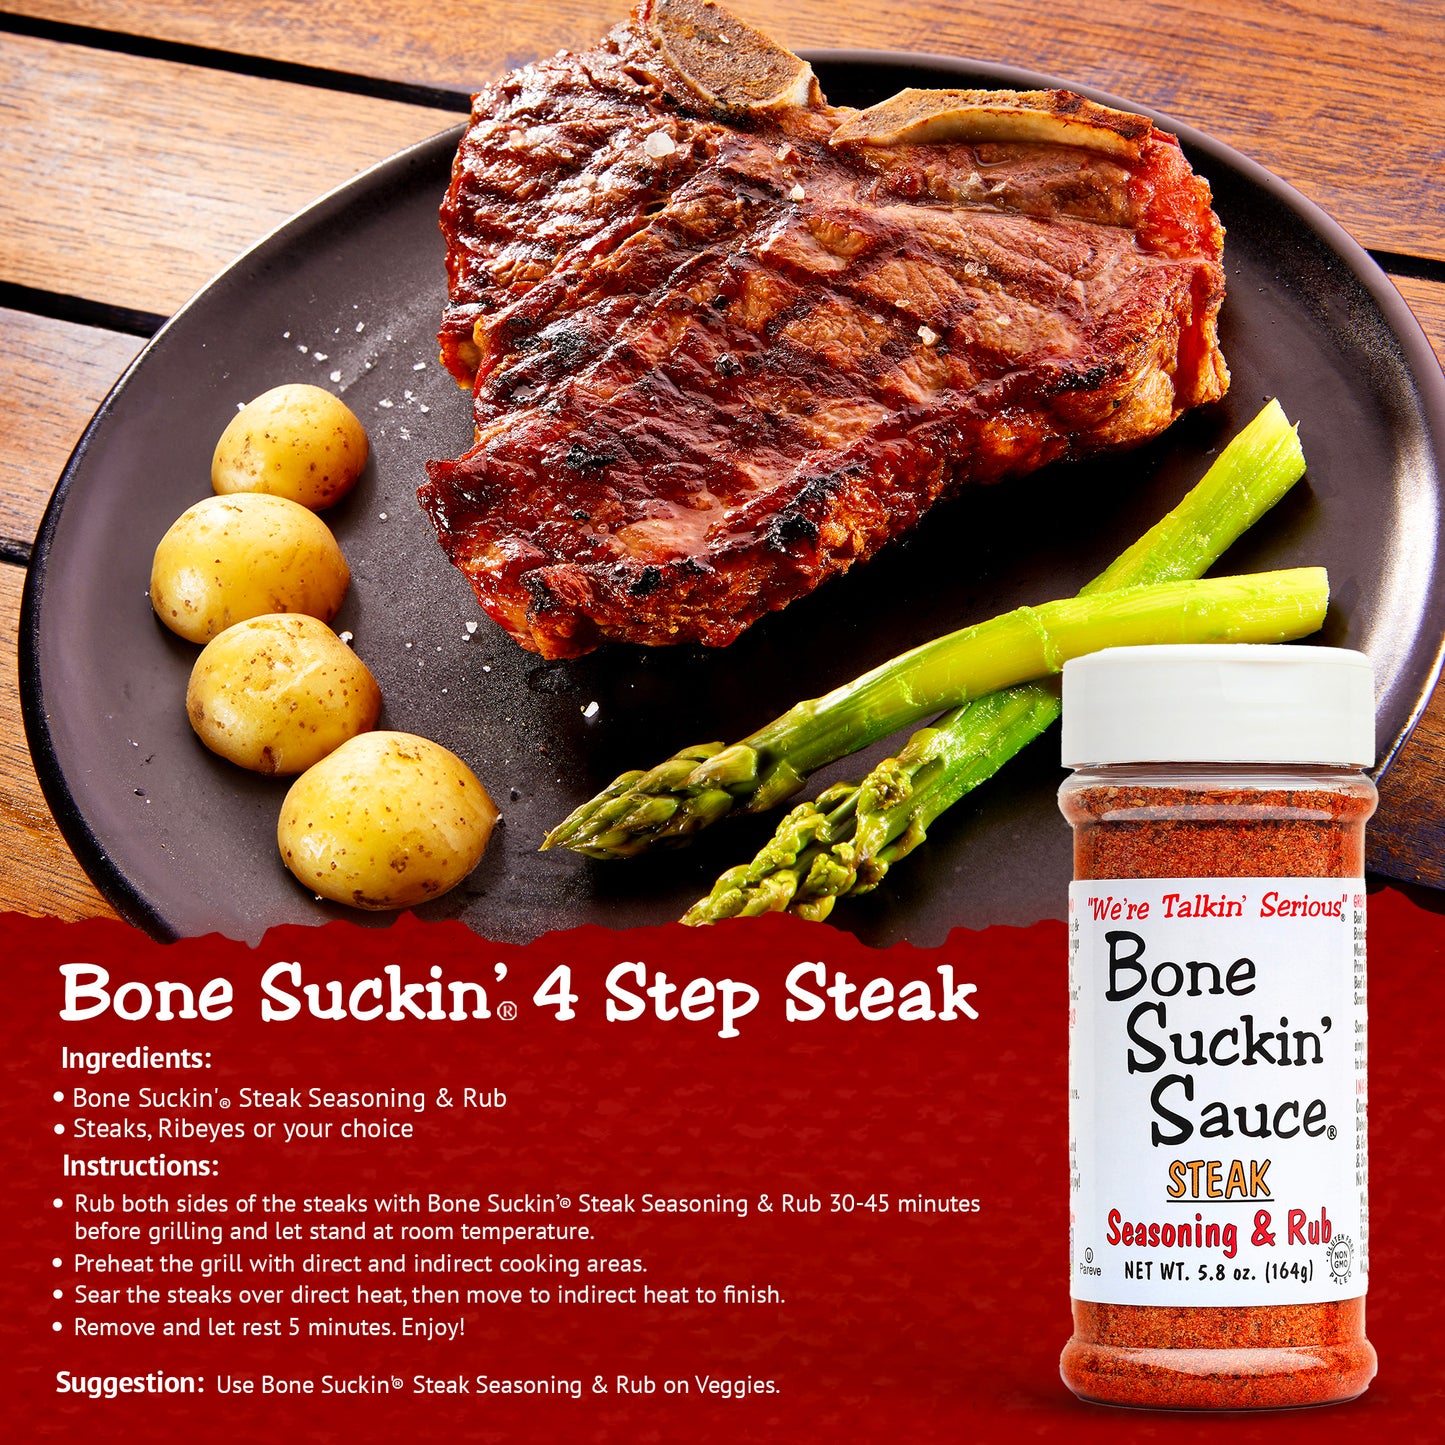 Bone Suckin'® Sugar Free Variety Seasonings: A Flavor-Packed Delight -delectable seasonings that deliver exceptional flavor without compromising your dietary preferences.